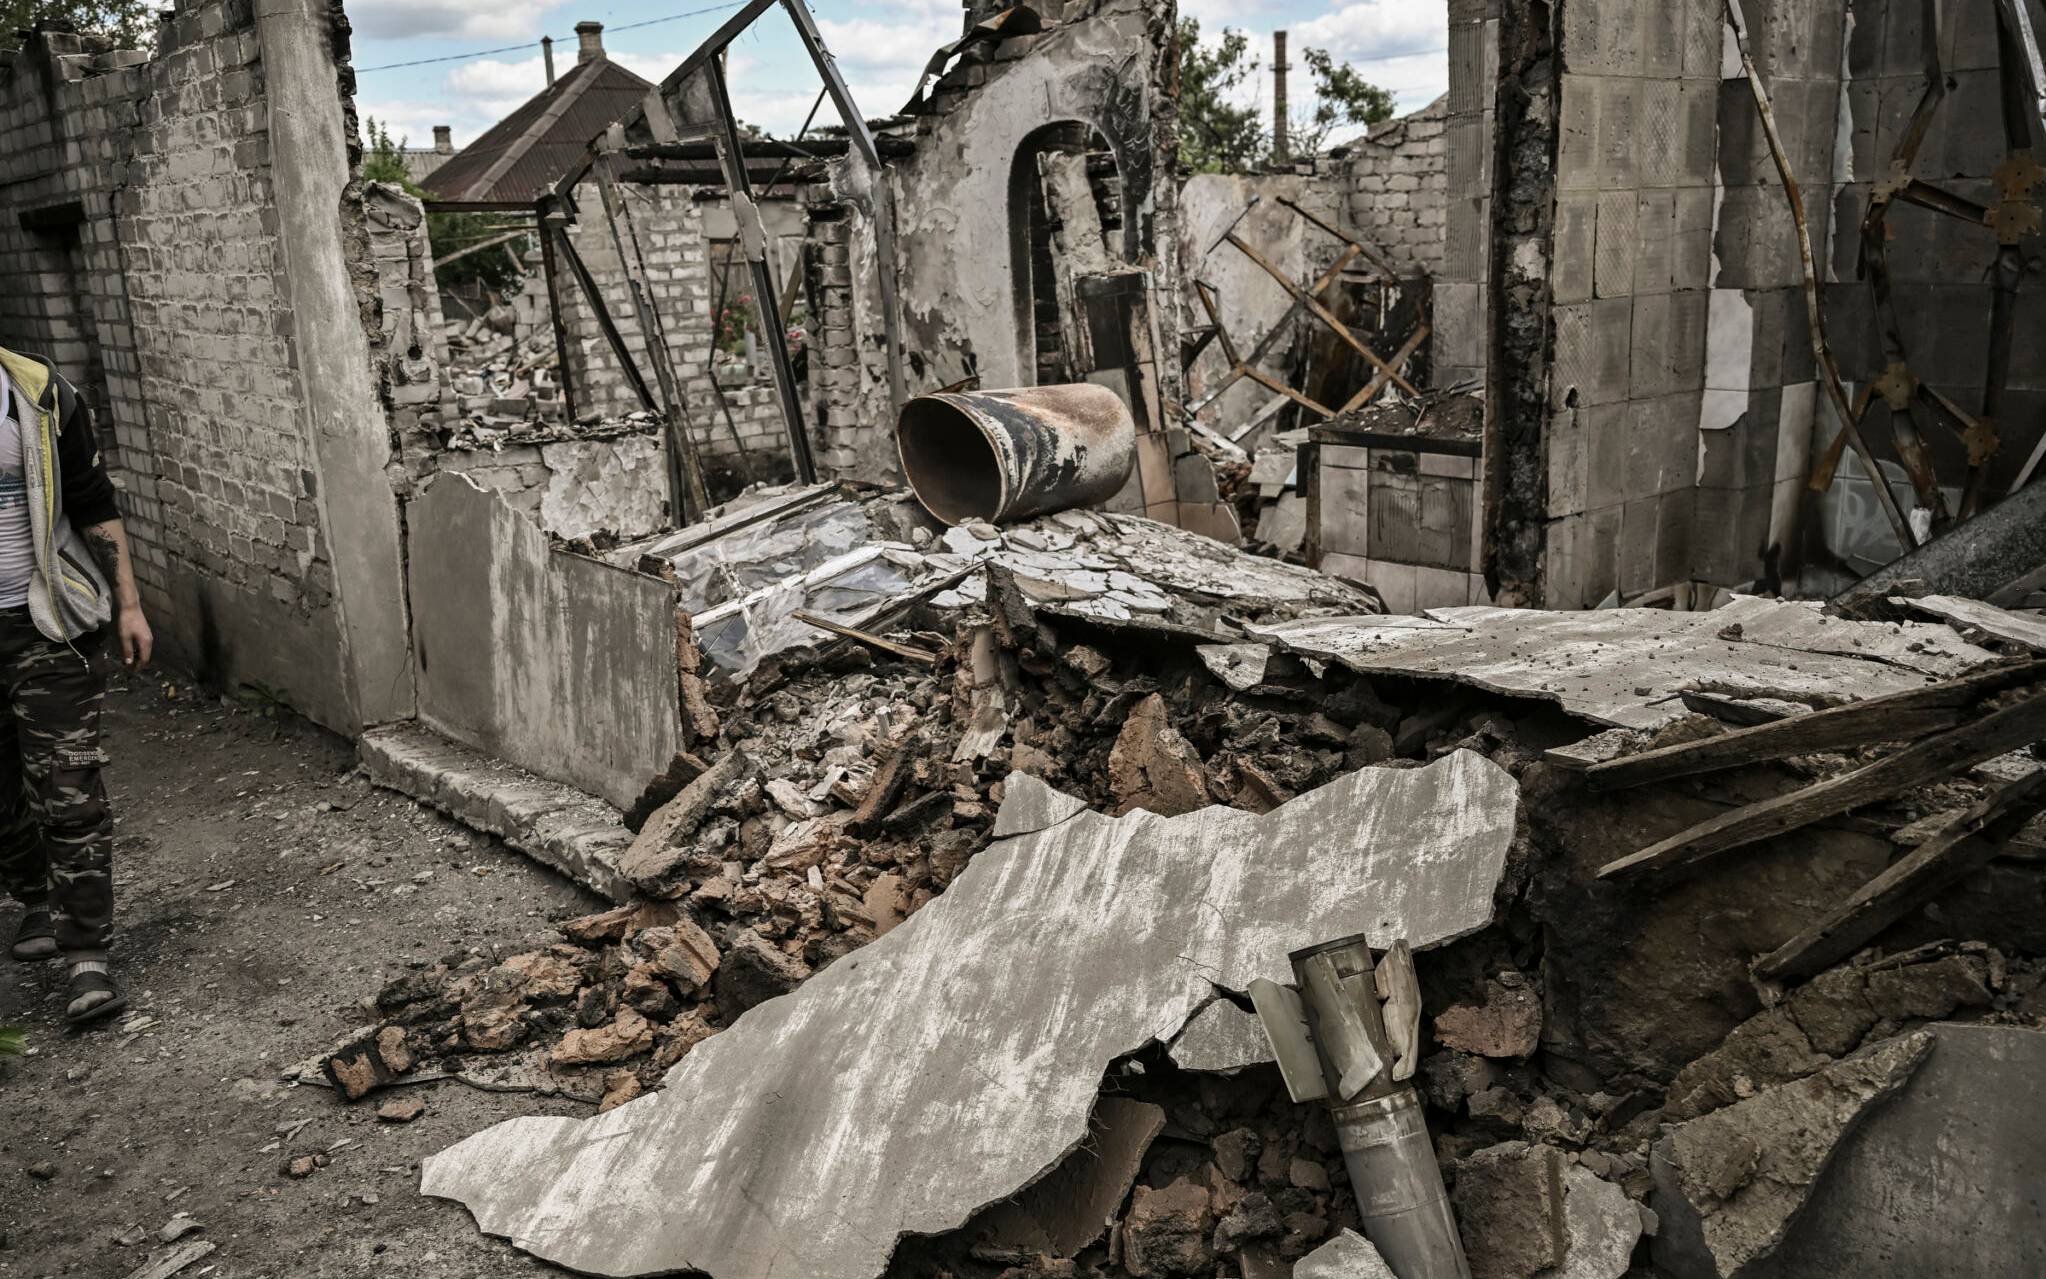 Ivan Sosnin, 19, walks next to his destroyed house in the city of Lysychansk at the eastern Ukrainian region of Donbas on June 7, 2022. (Photo by ARIS MESSINIS / AFP)